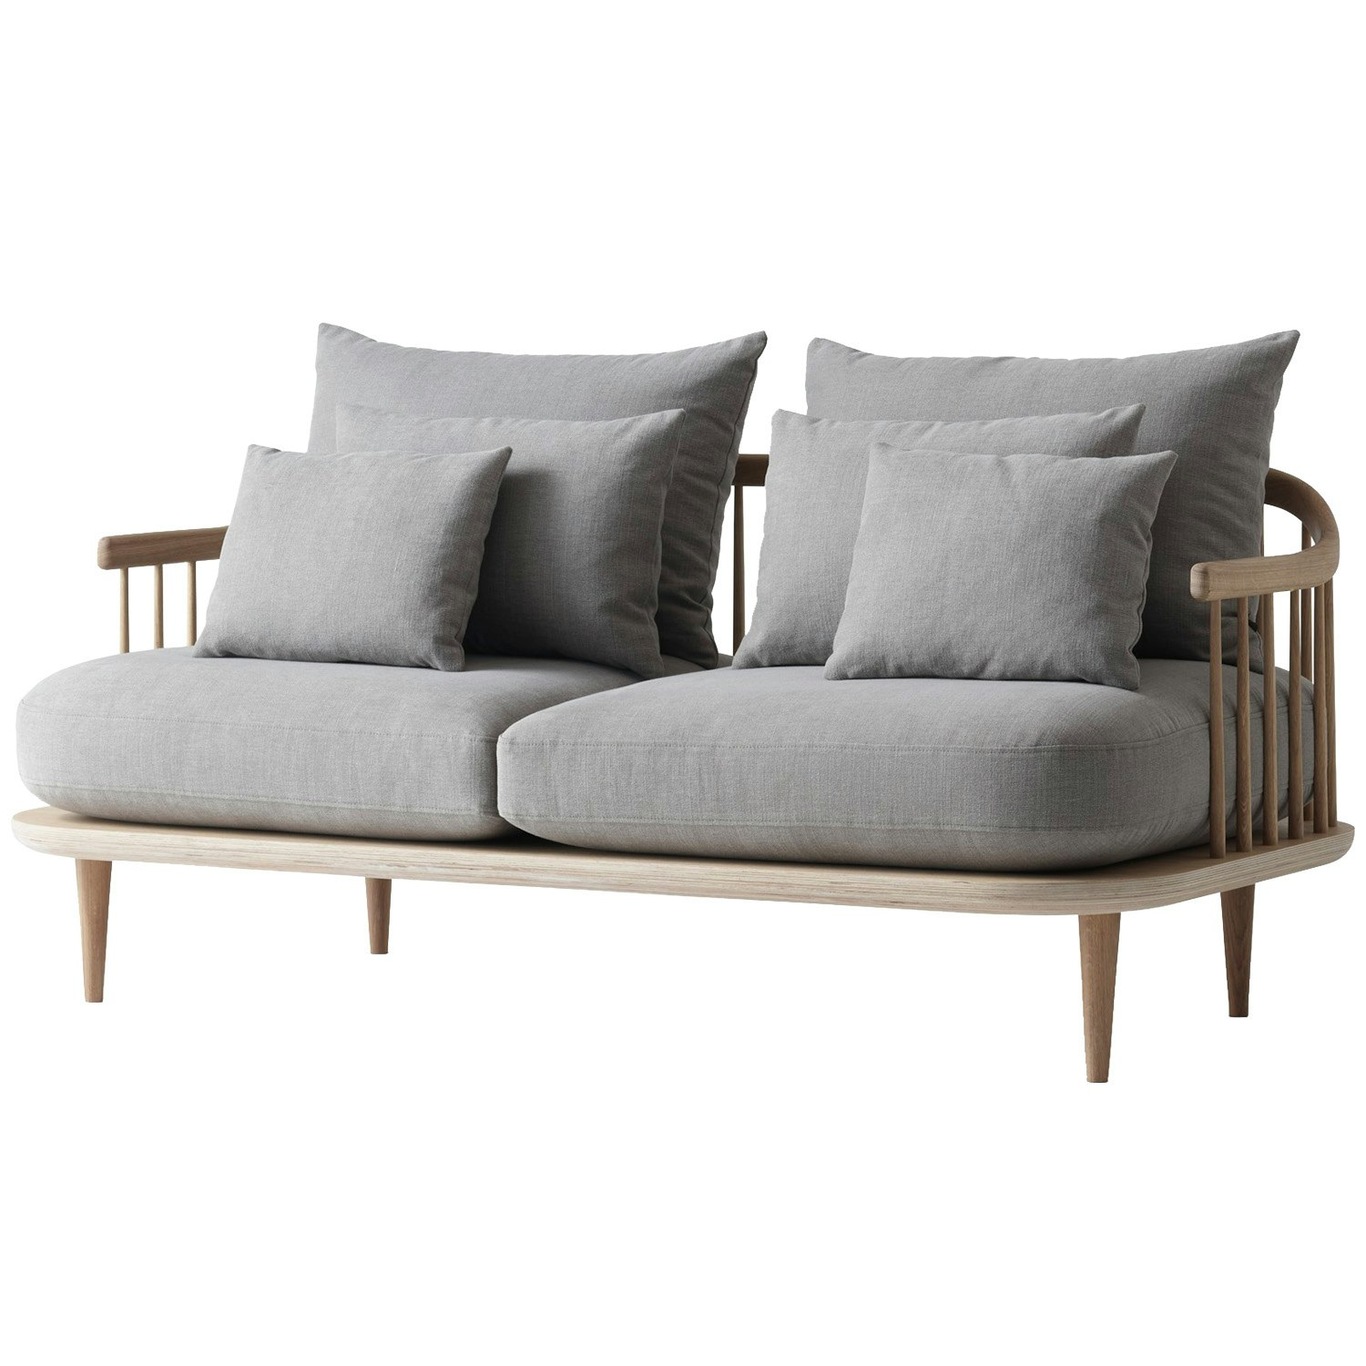 Fly sofa Sc2 Sofa, Wit Geolied Eiken / Hot Madison 094 Nature